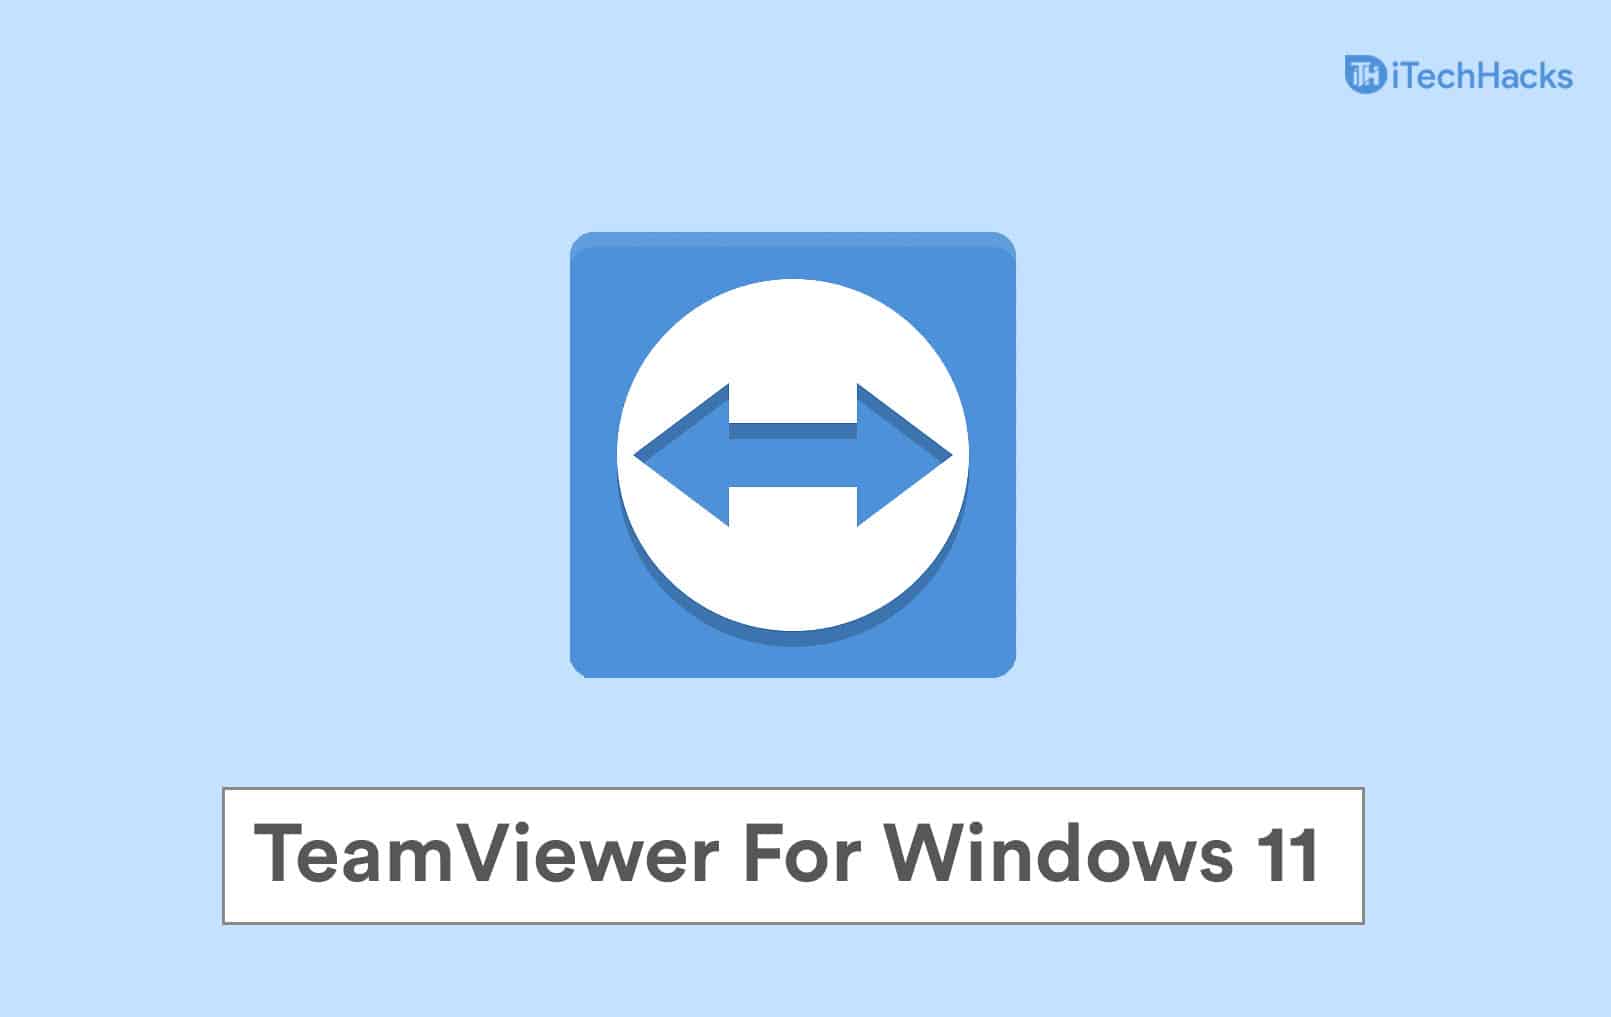 How To Download And Install TeamViewer For Windows 11